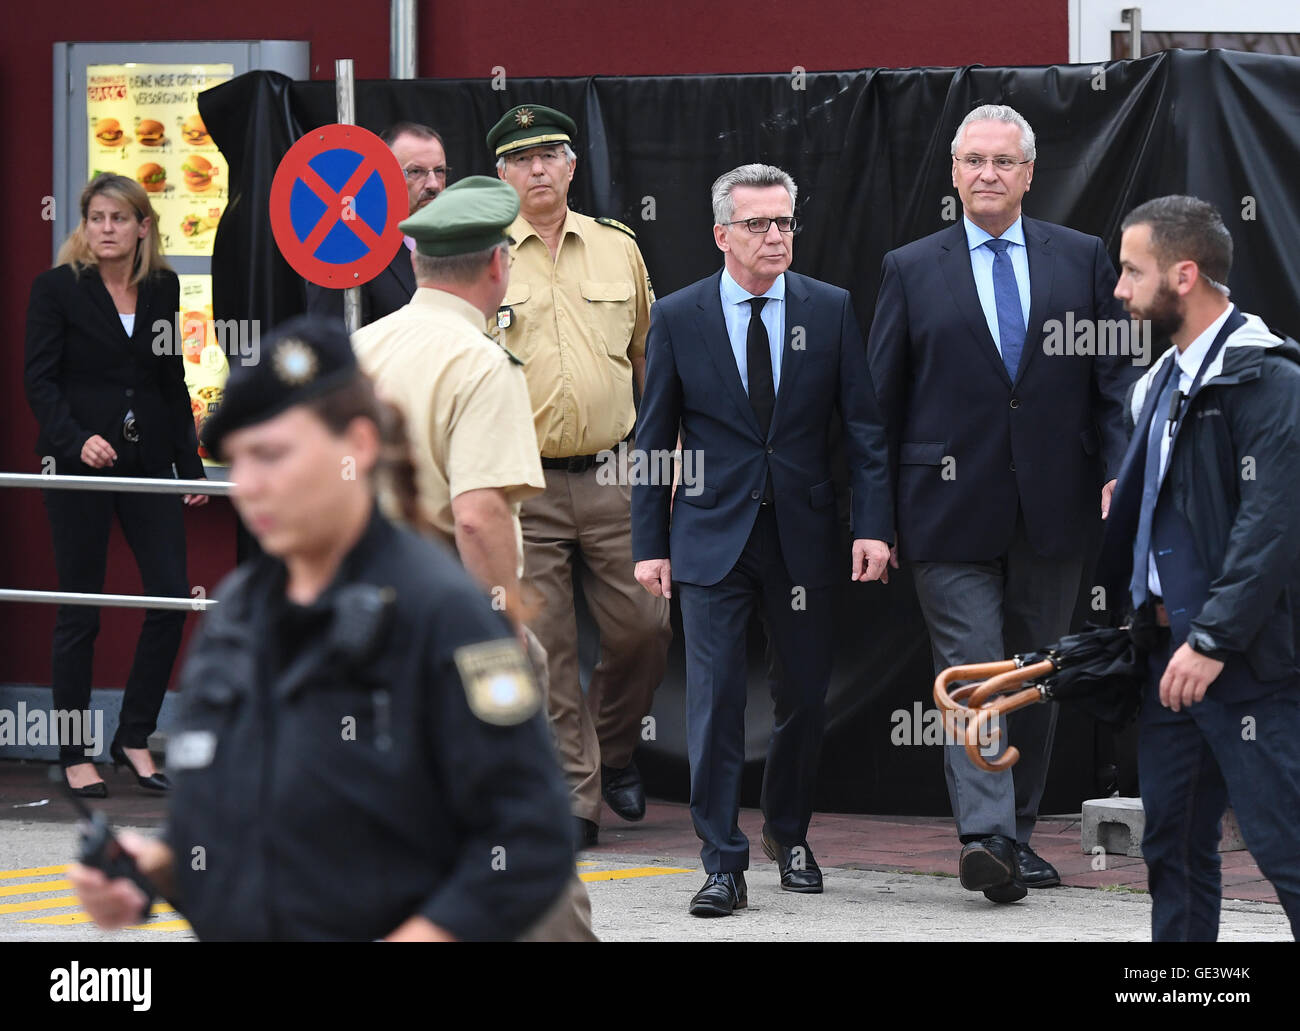 Munich, Germany. 23rd July, 2016. German Interior Minister Thomas de Maiziere (CDU, M) and Bavaria's Interior Minister Joachim Herrmann (CSU, 2.f.R) leave a McDonald's restaurant after inspecting the crime scene near to the Olympia Einkaufszentrum (OEZ), one day after a shooting with deaths and casualties in the building, in Munich, Germany, 23 July 2016. The fatal shooting was carried out by an 18-year-old German-Iranian man. Ten people died, including the perpetrator. Photo: SVEN HOPPE/dpa/Alamy Live News Stock Photo